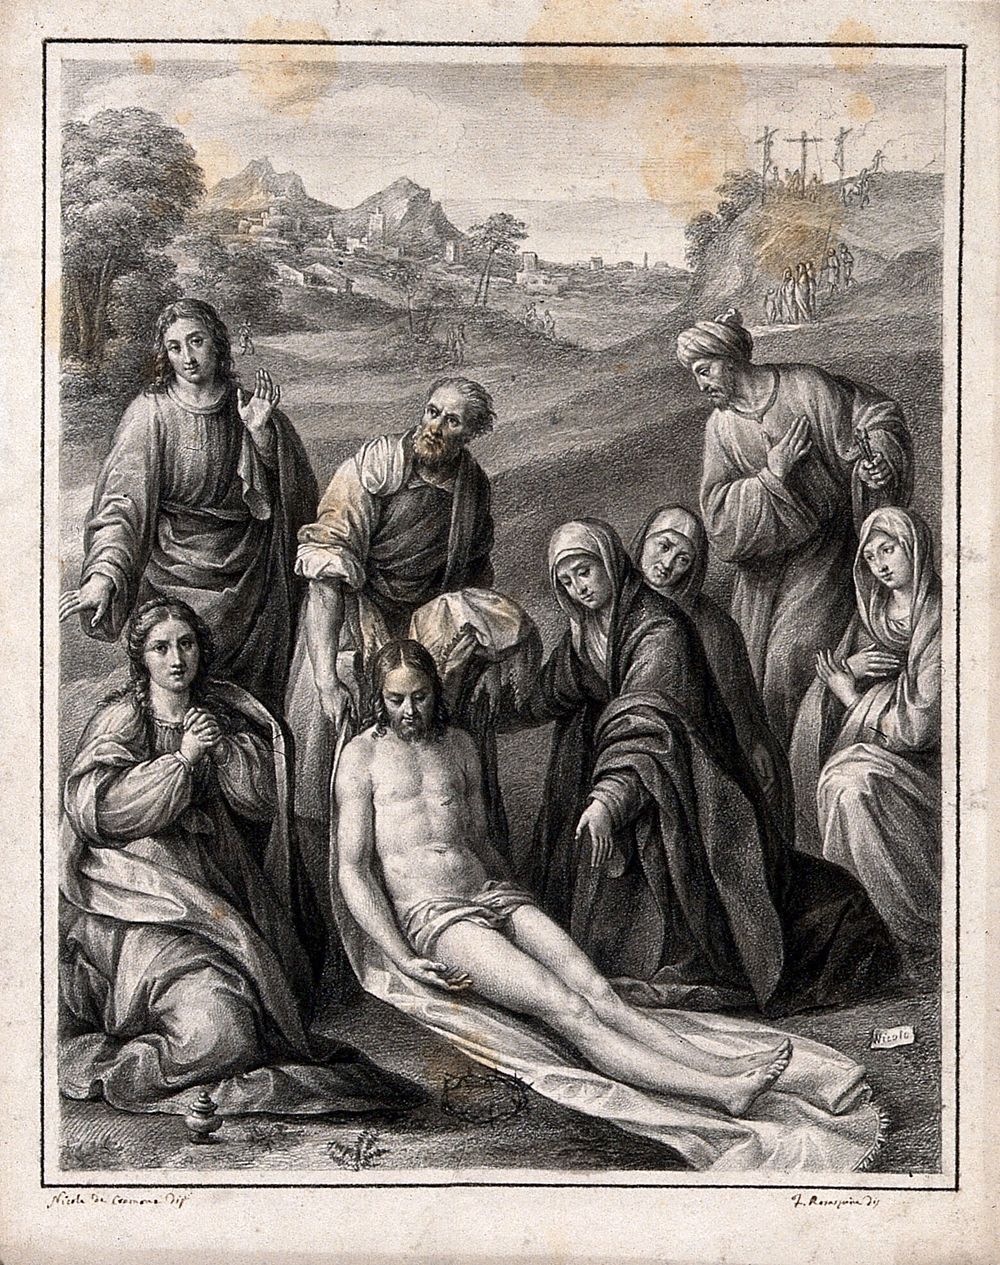 The deposition of Christ from the cross. Drawing by F. Rosaspina, c. 1830, after Niccolò da Cremona, 1518.